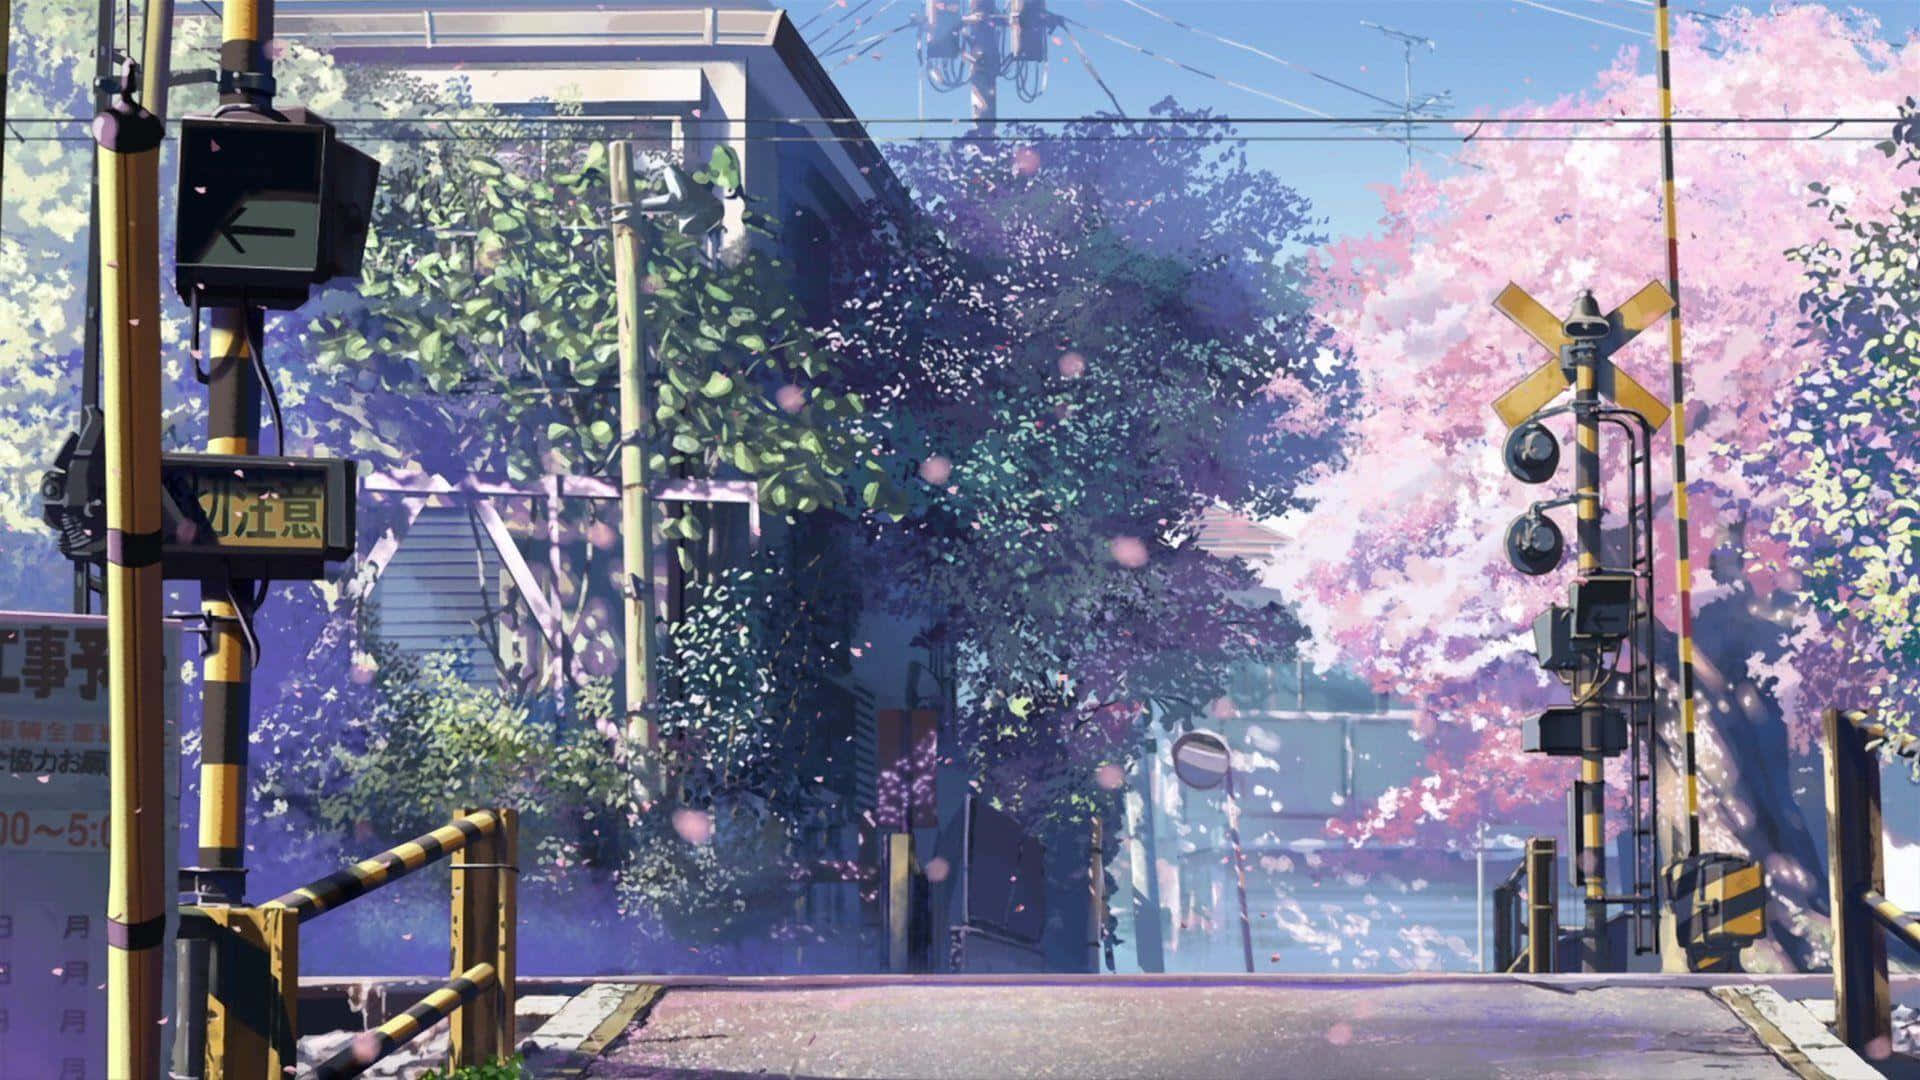 The beautiful, tranquil sky floats above Takaki and Akari’s bittersweet story in 5 Centimeters Per Second